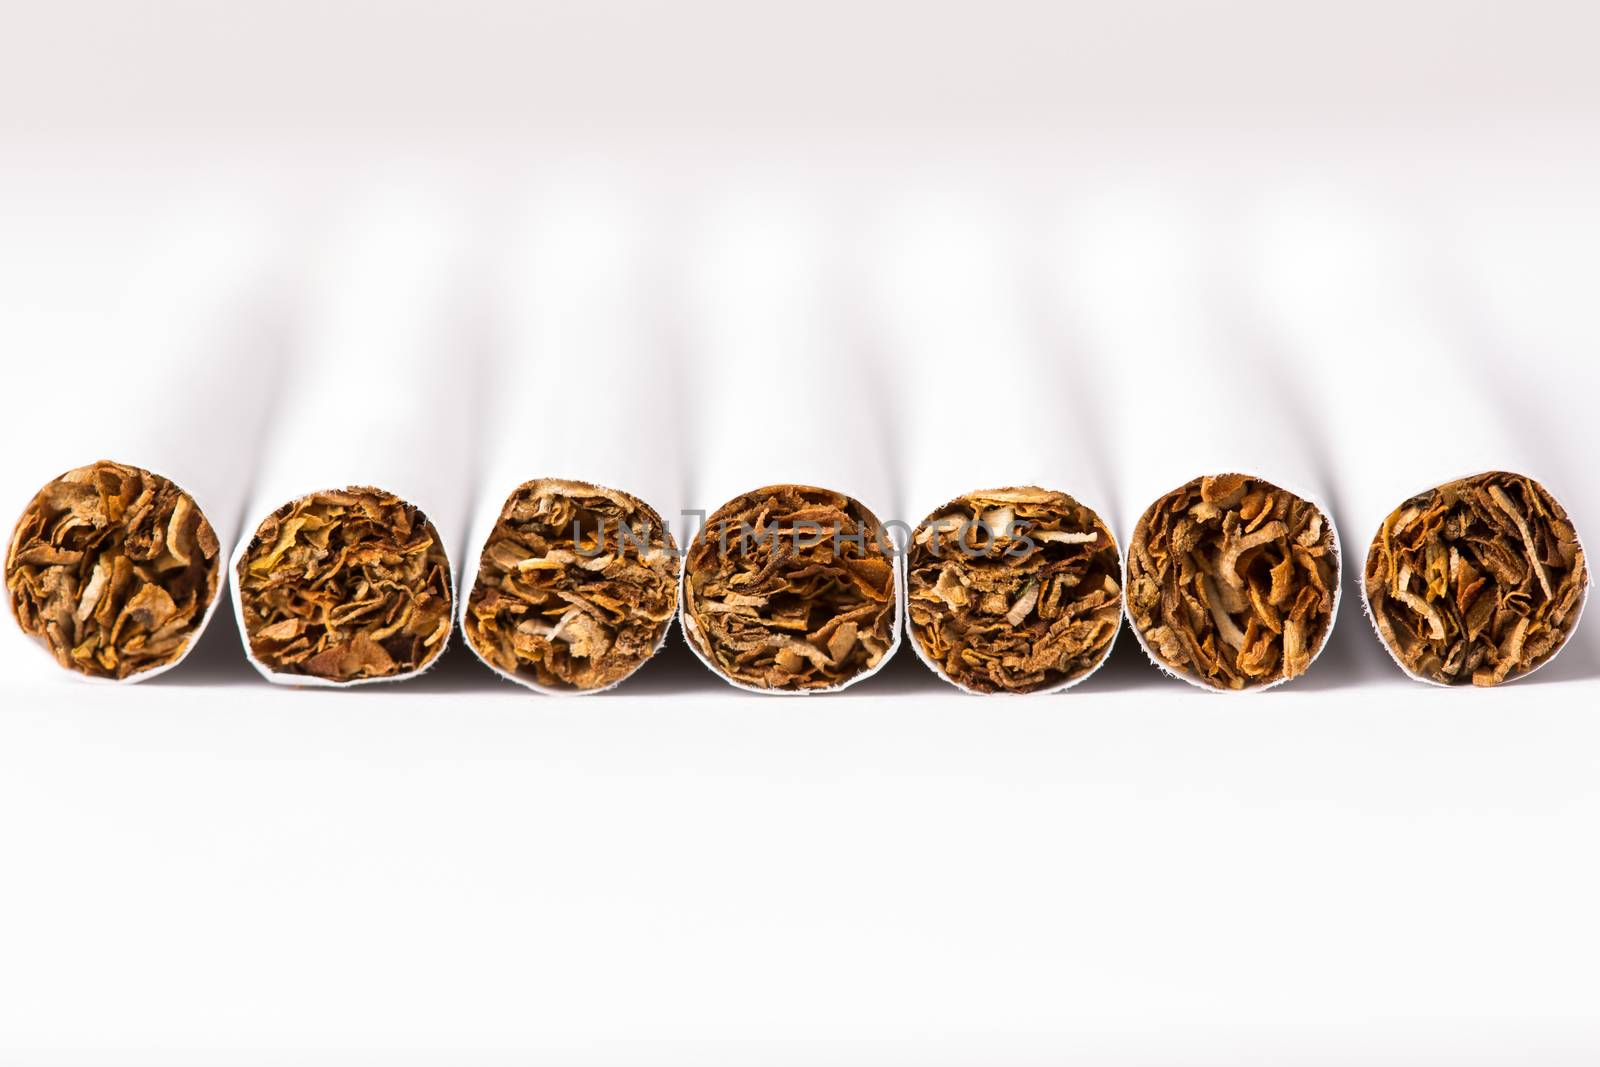 Cigarettes arranged in a row, a background by stockyimages